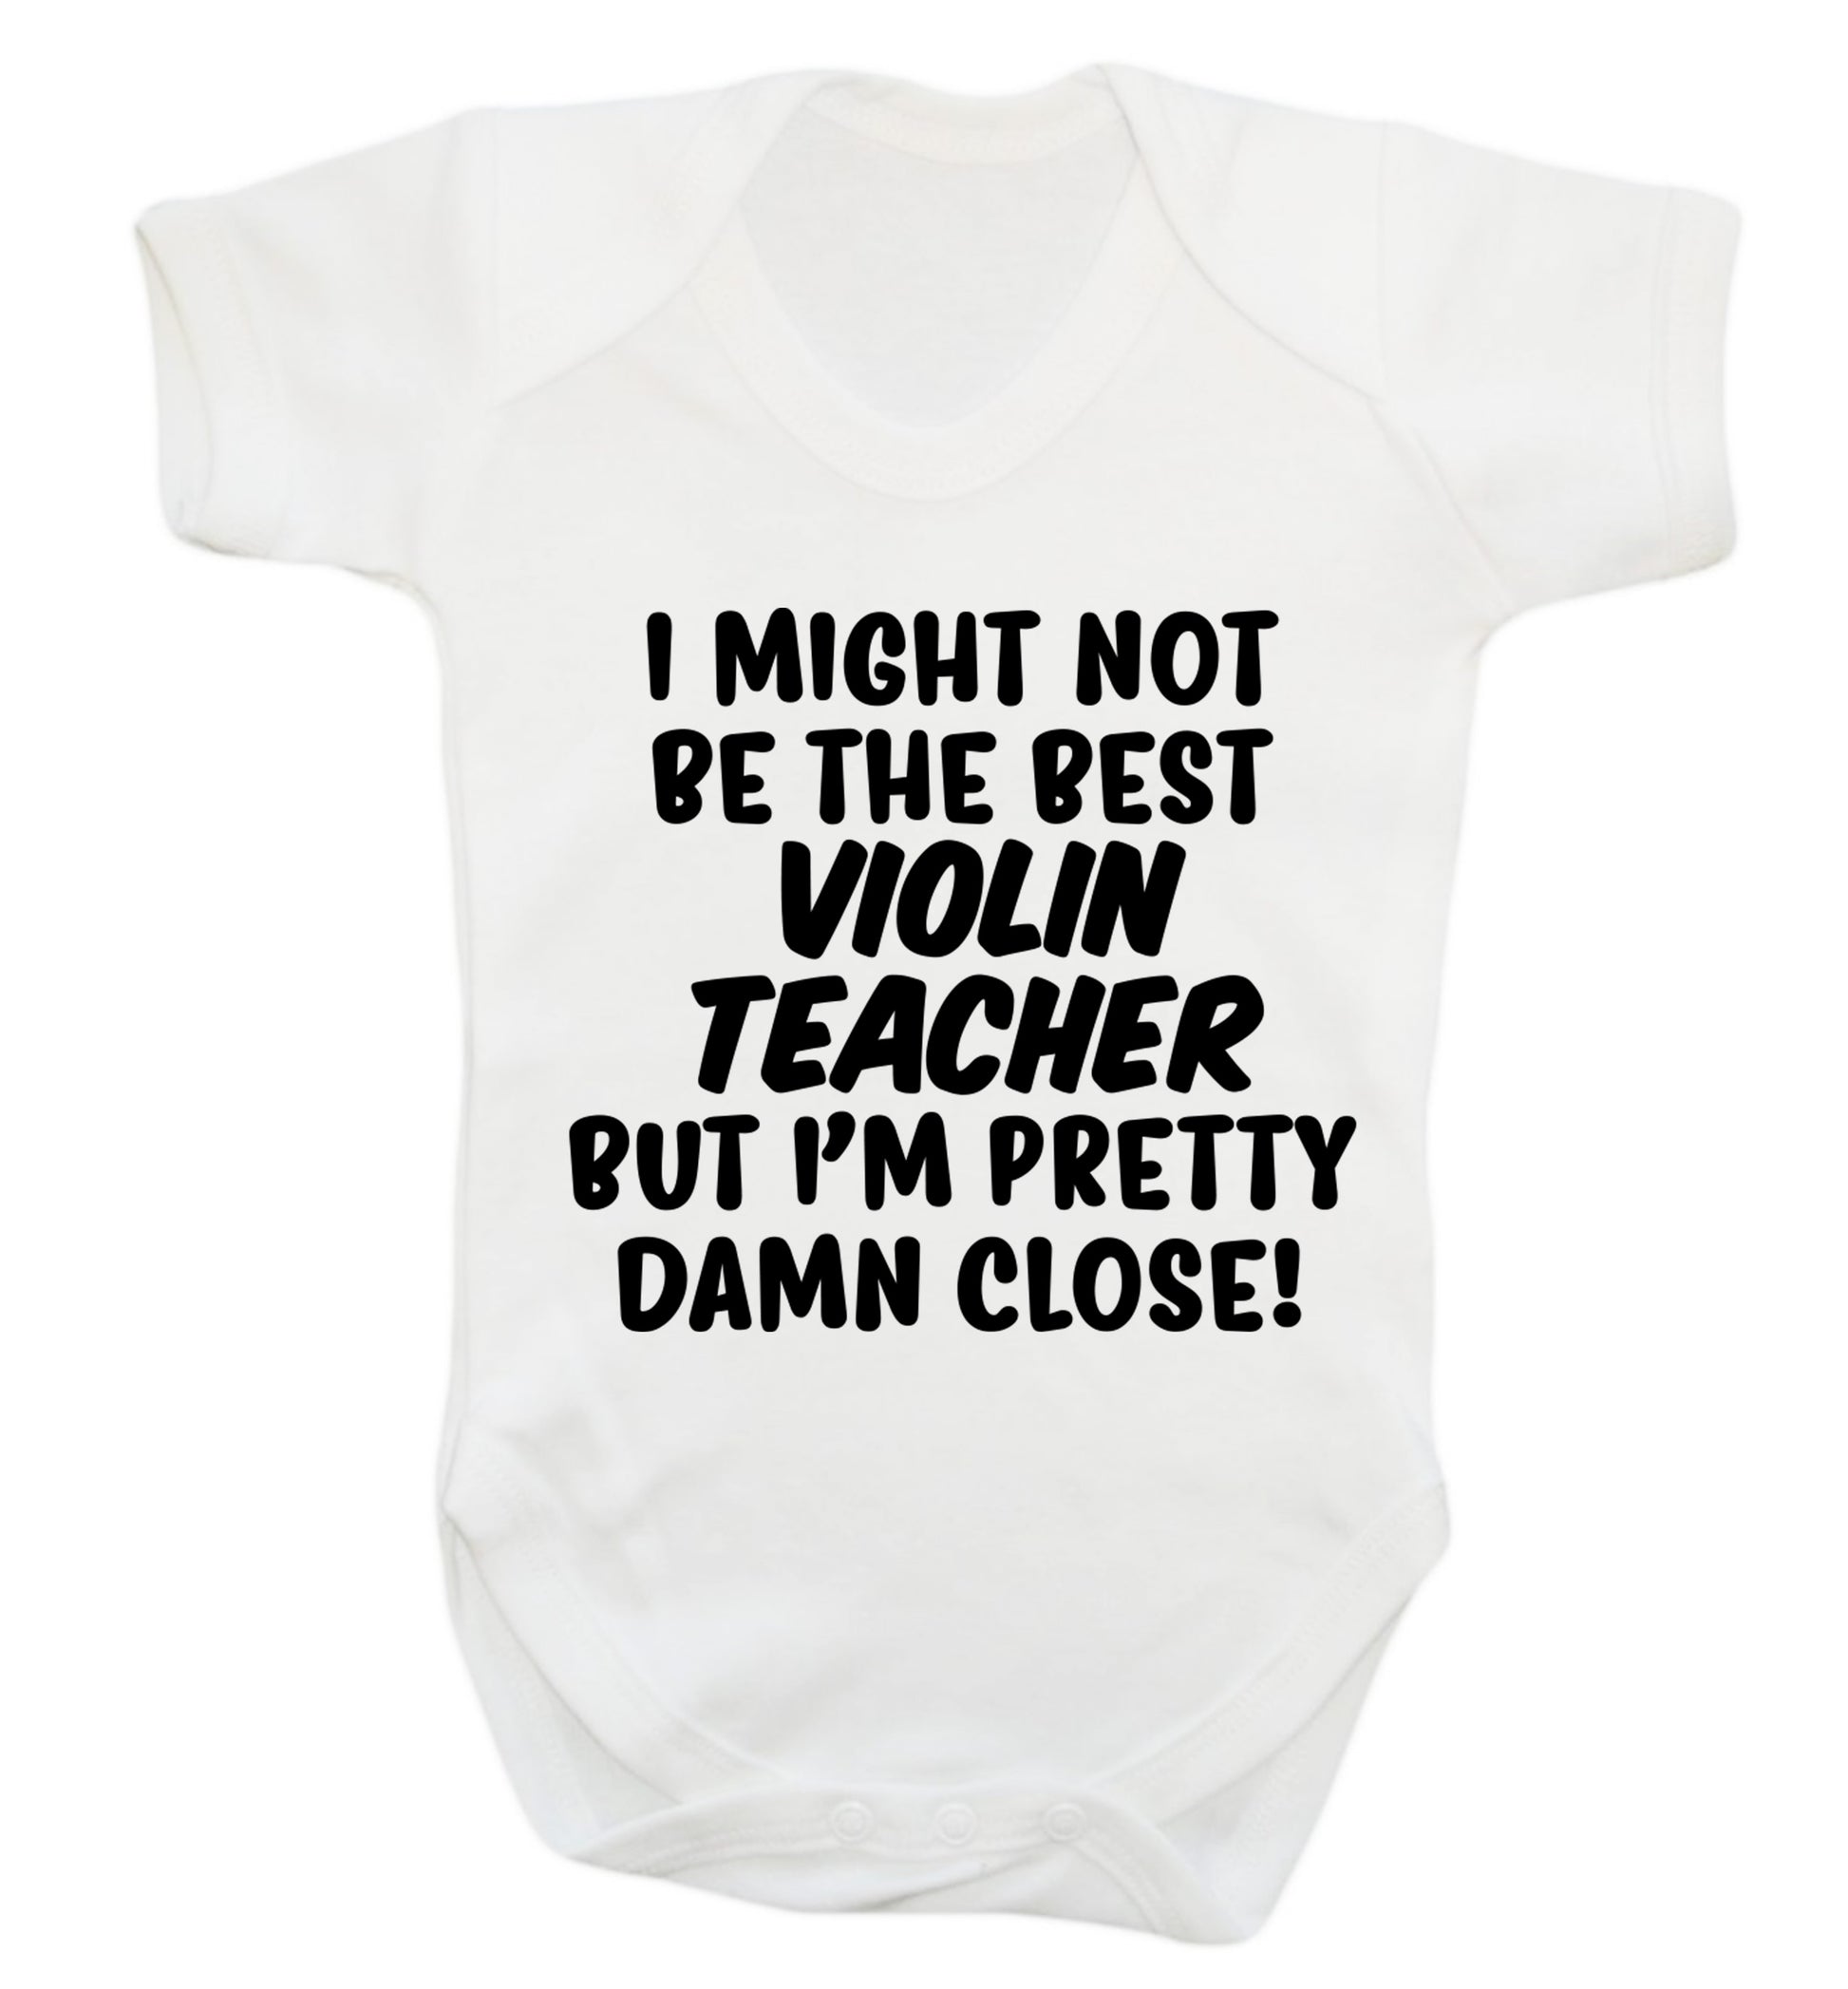 I might not be the best violin teacher but I'm pretty close Baby Vest white 18-24 months